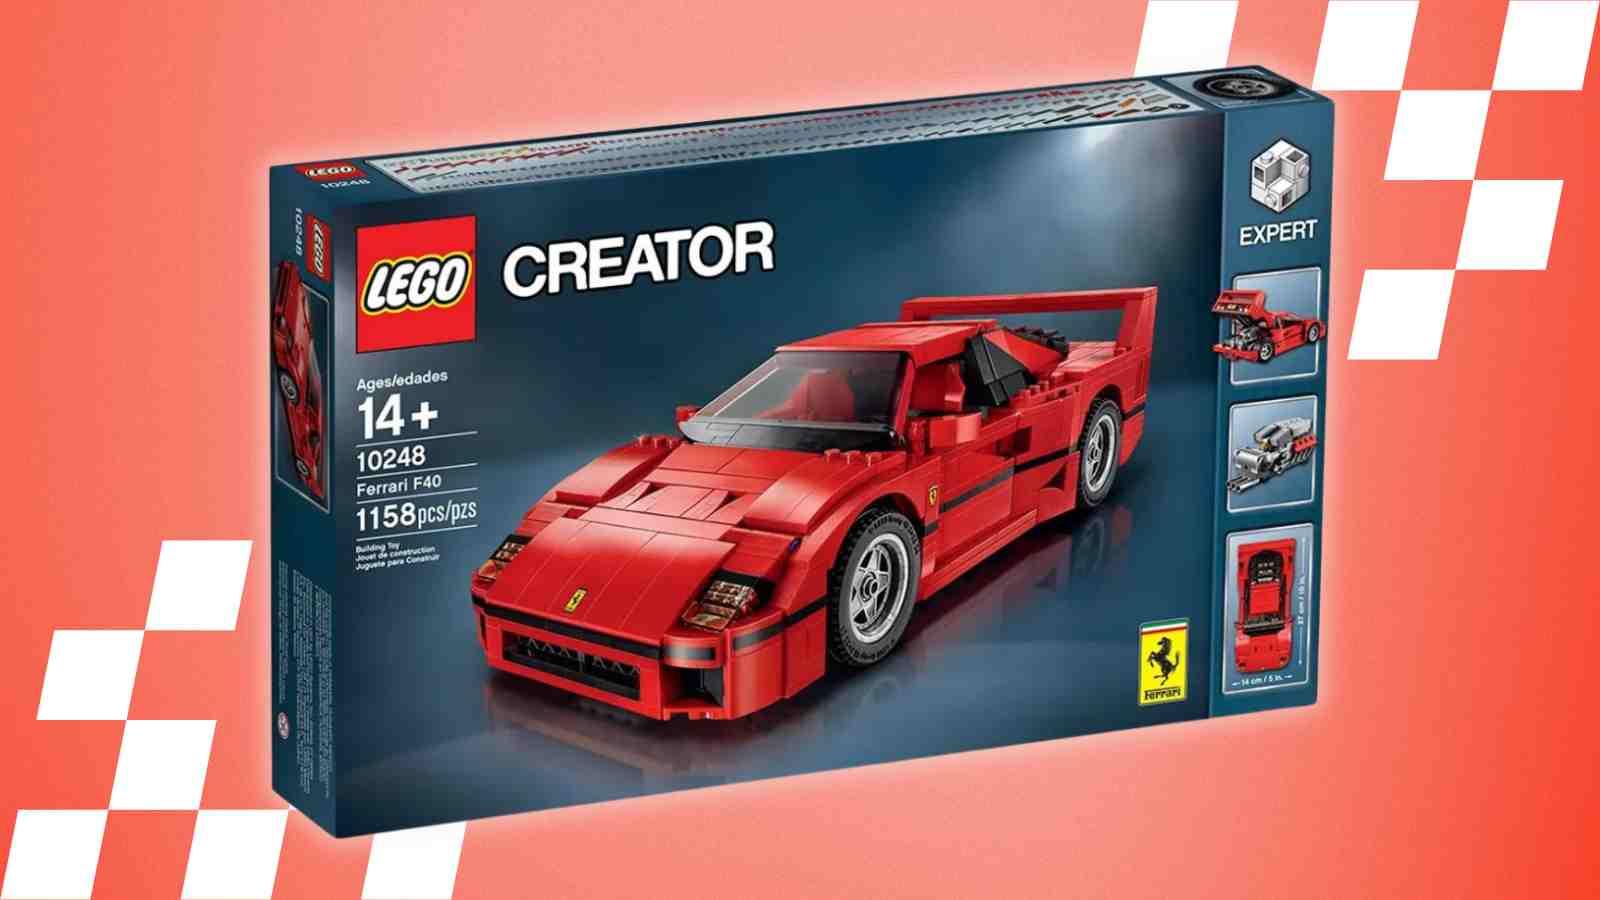 The LEGO Ferrari F40 on a red background with racing graphics